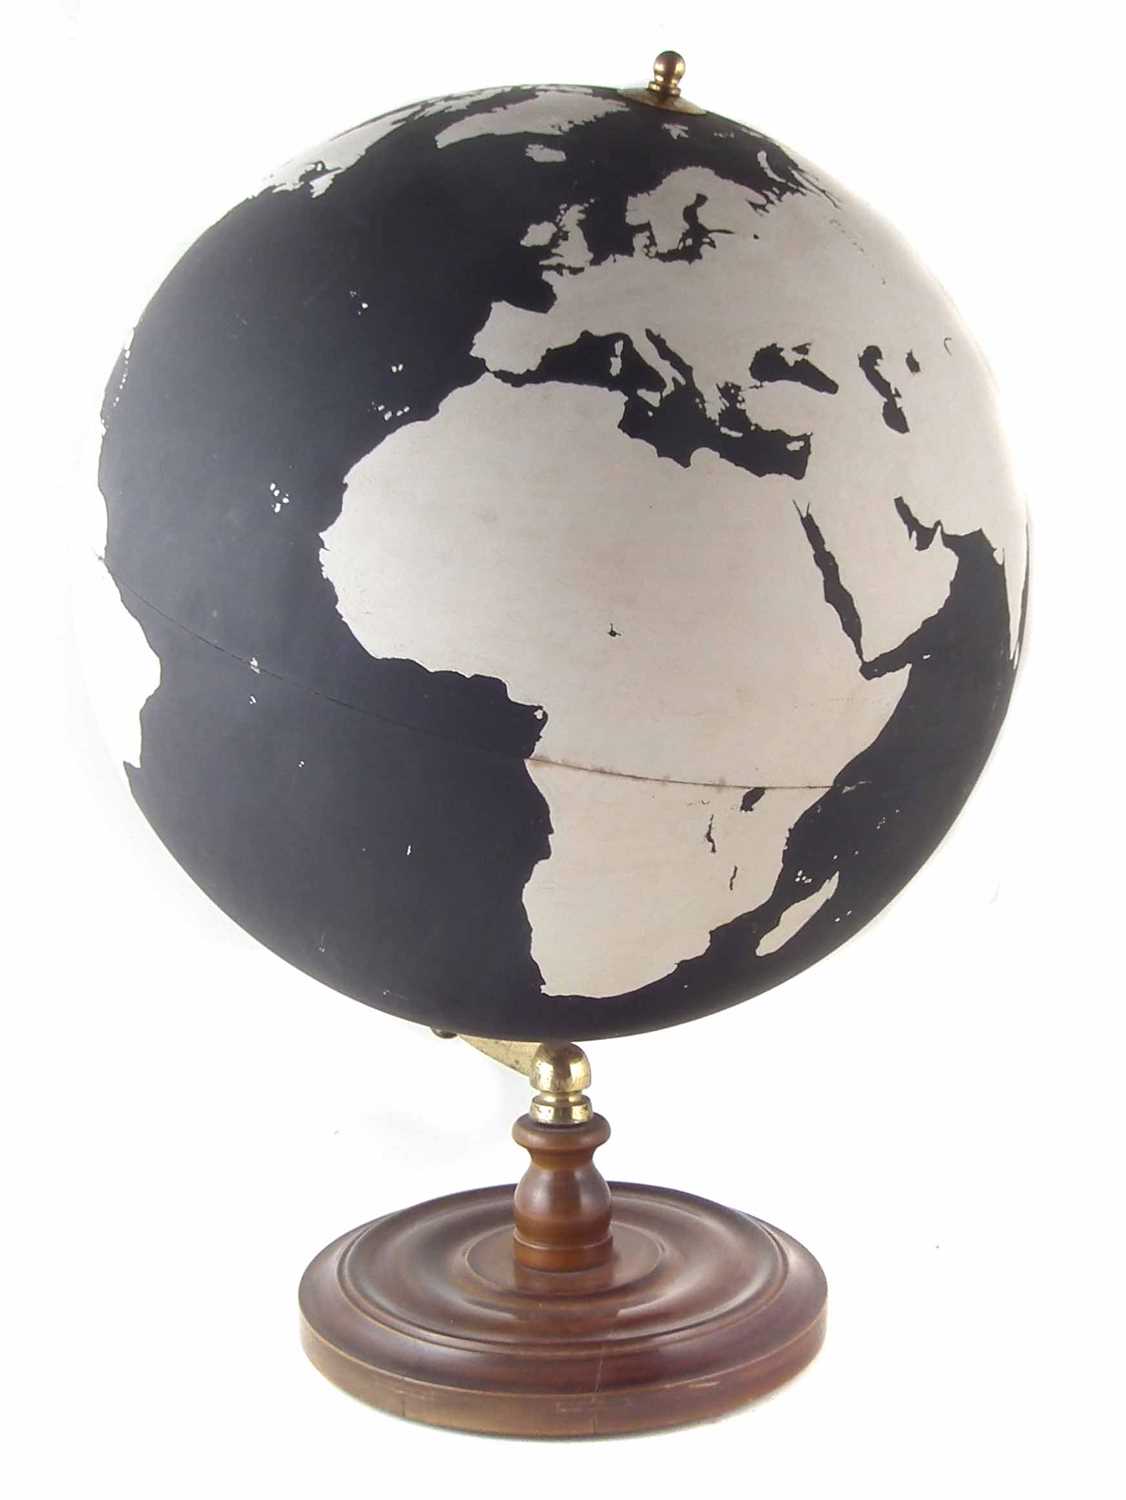 Lot 208 - Philips "Slate" surface globe, diameter 19" with brass and turned wooden base.